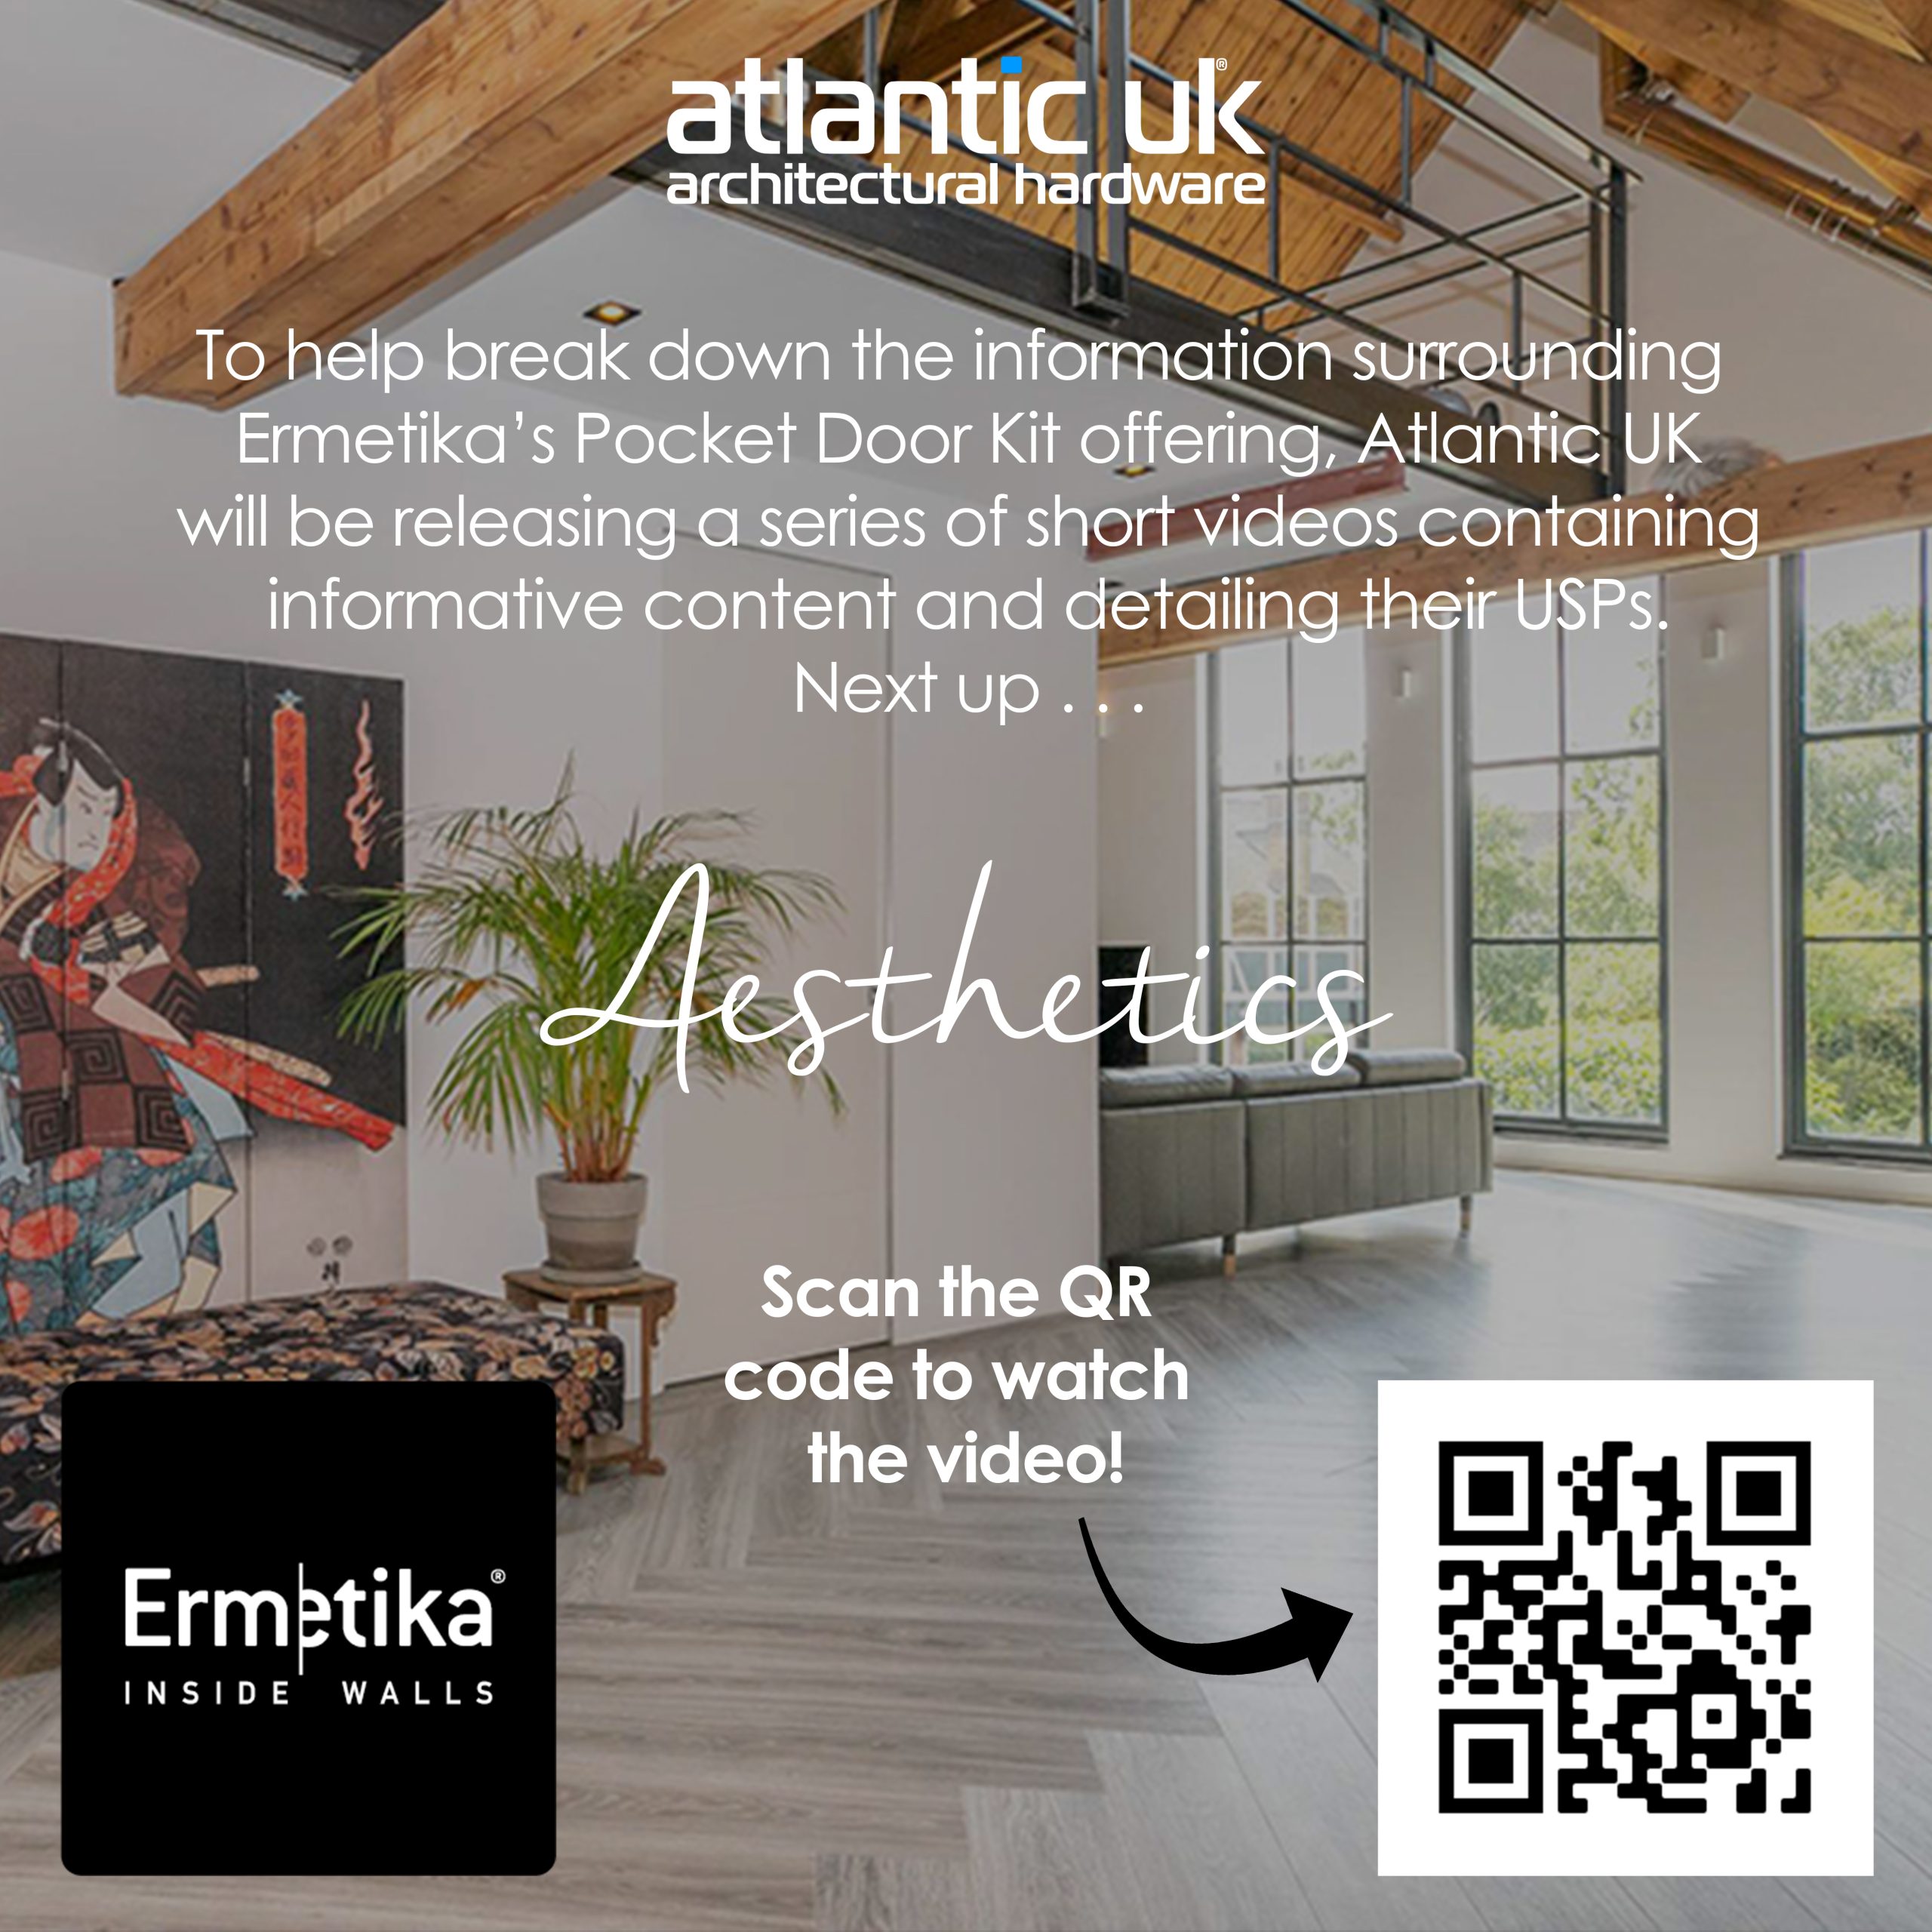 Beautiful Aesthetics… Learn more with the Ermetika Video Series! image